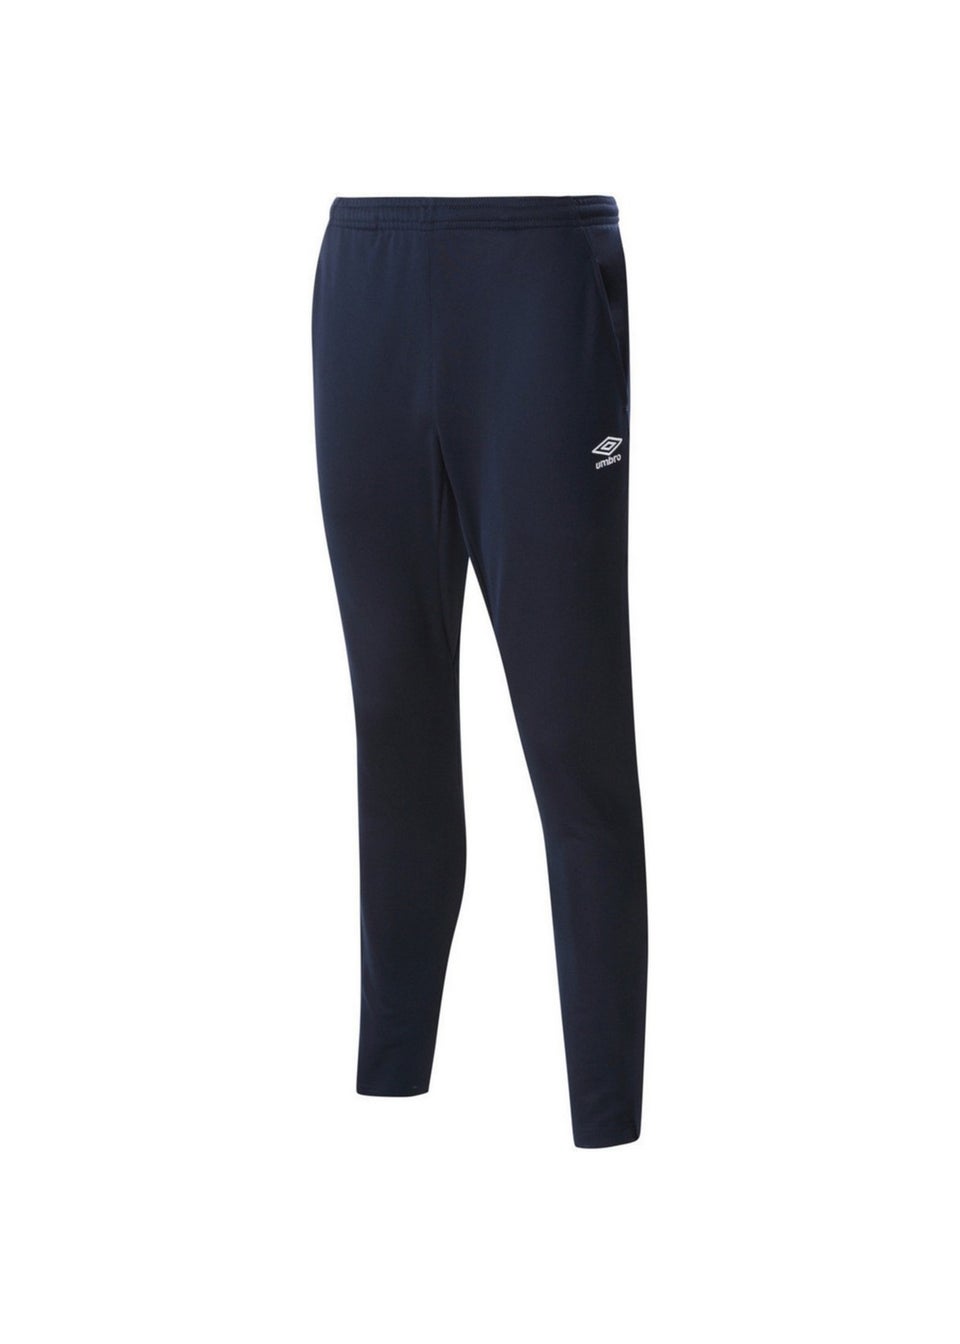 Umbro Kids Navy Woven Tapered Jogging Bottoms (7-10yrs)